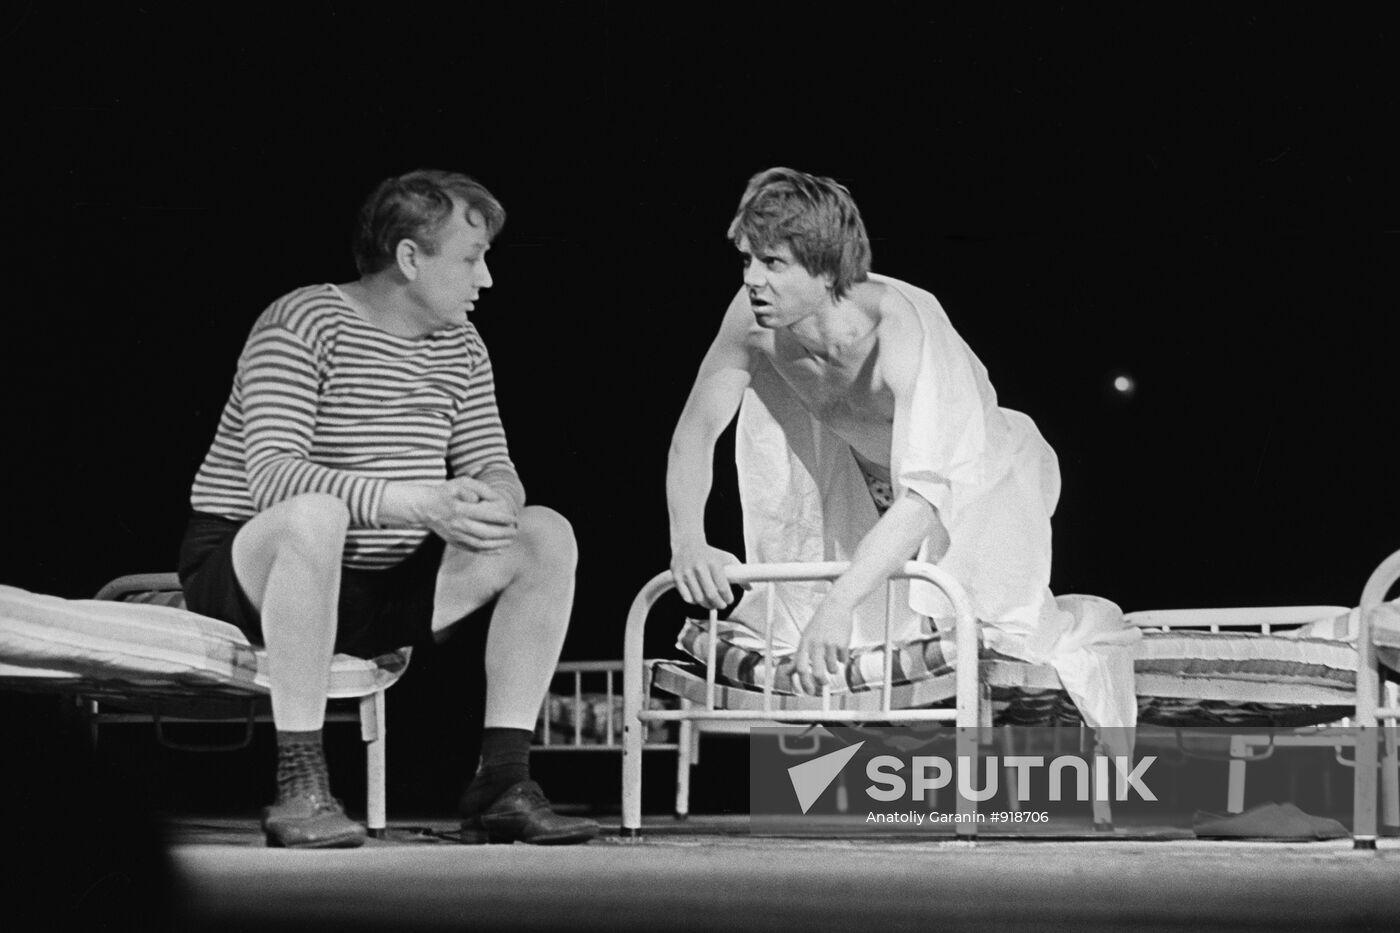 Scene from play staged at Moscow's Sovremennik theater